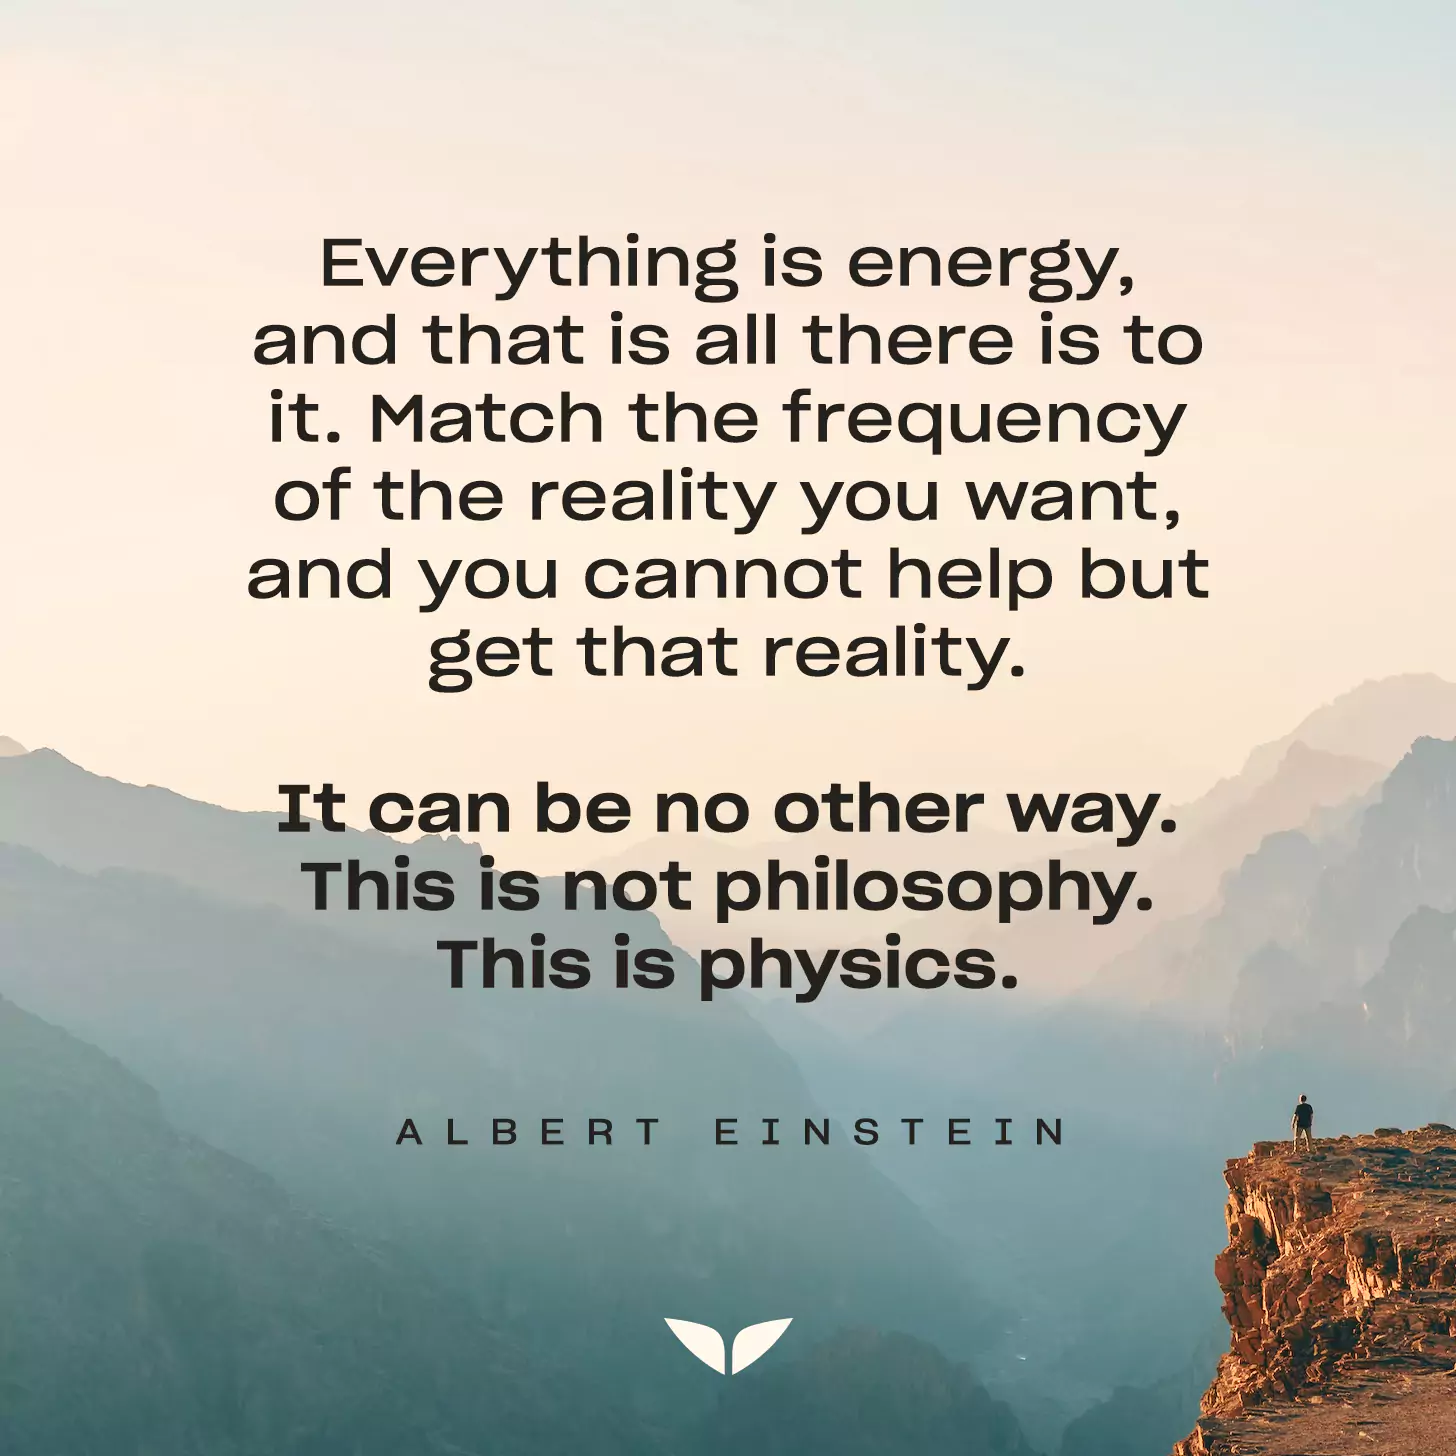 Albert Einstein quote about everything is energy